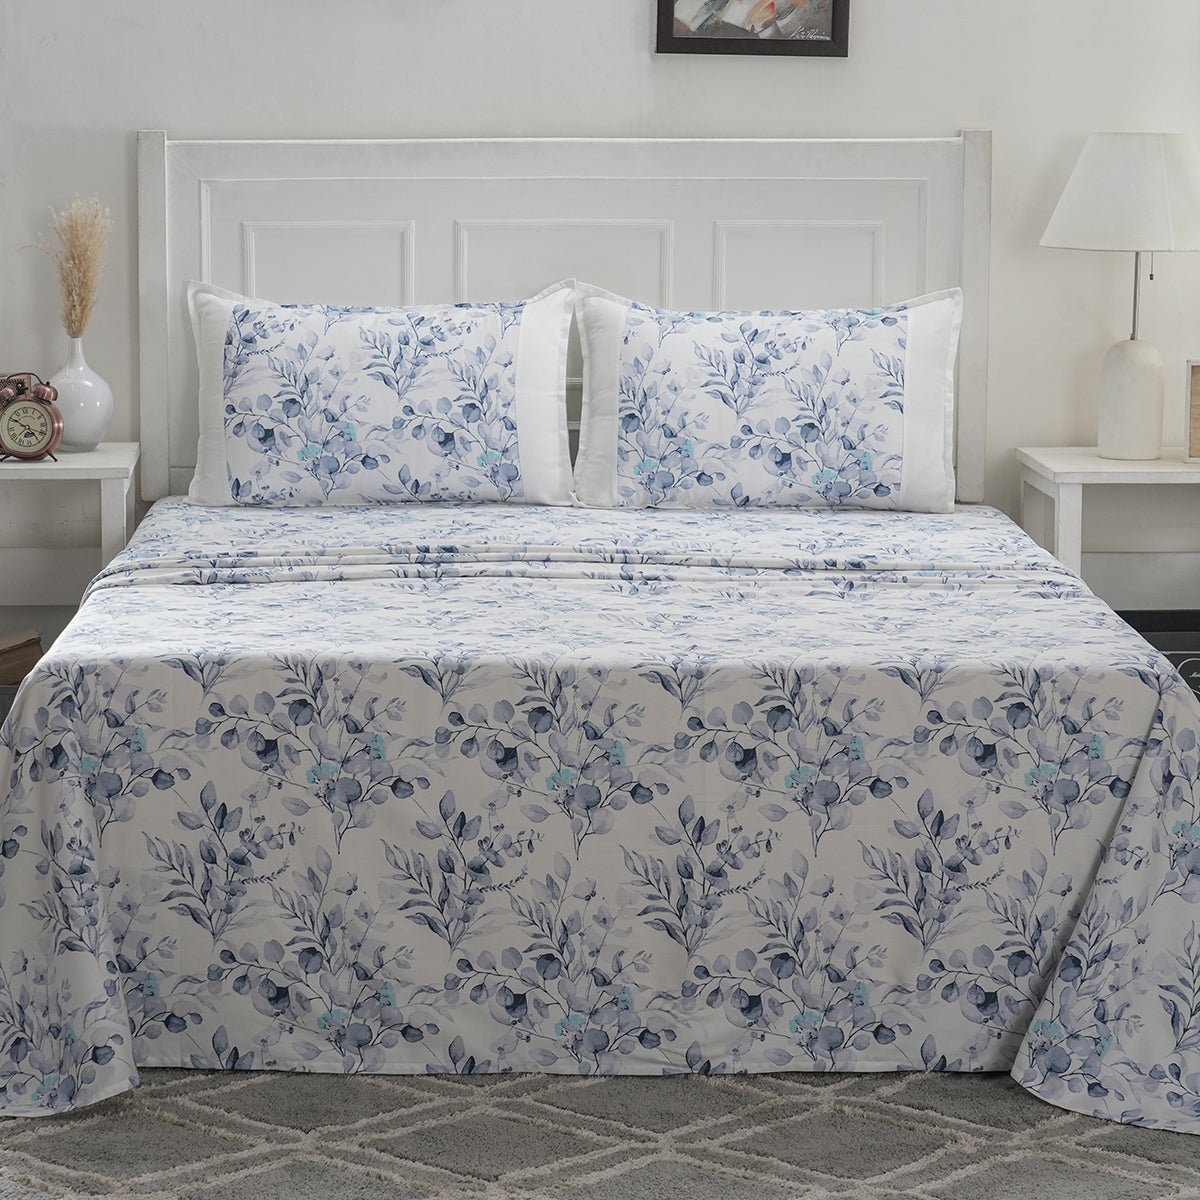 Optimist Bloom 200 TC Leilani Cotton Printed Bed Sheet With Pillow Covers